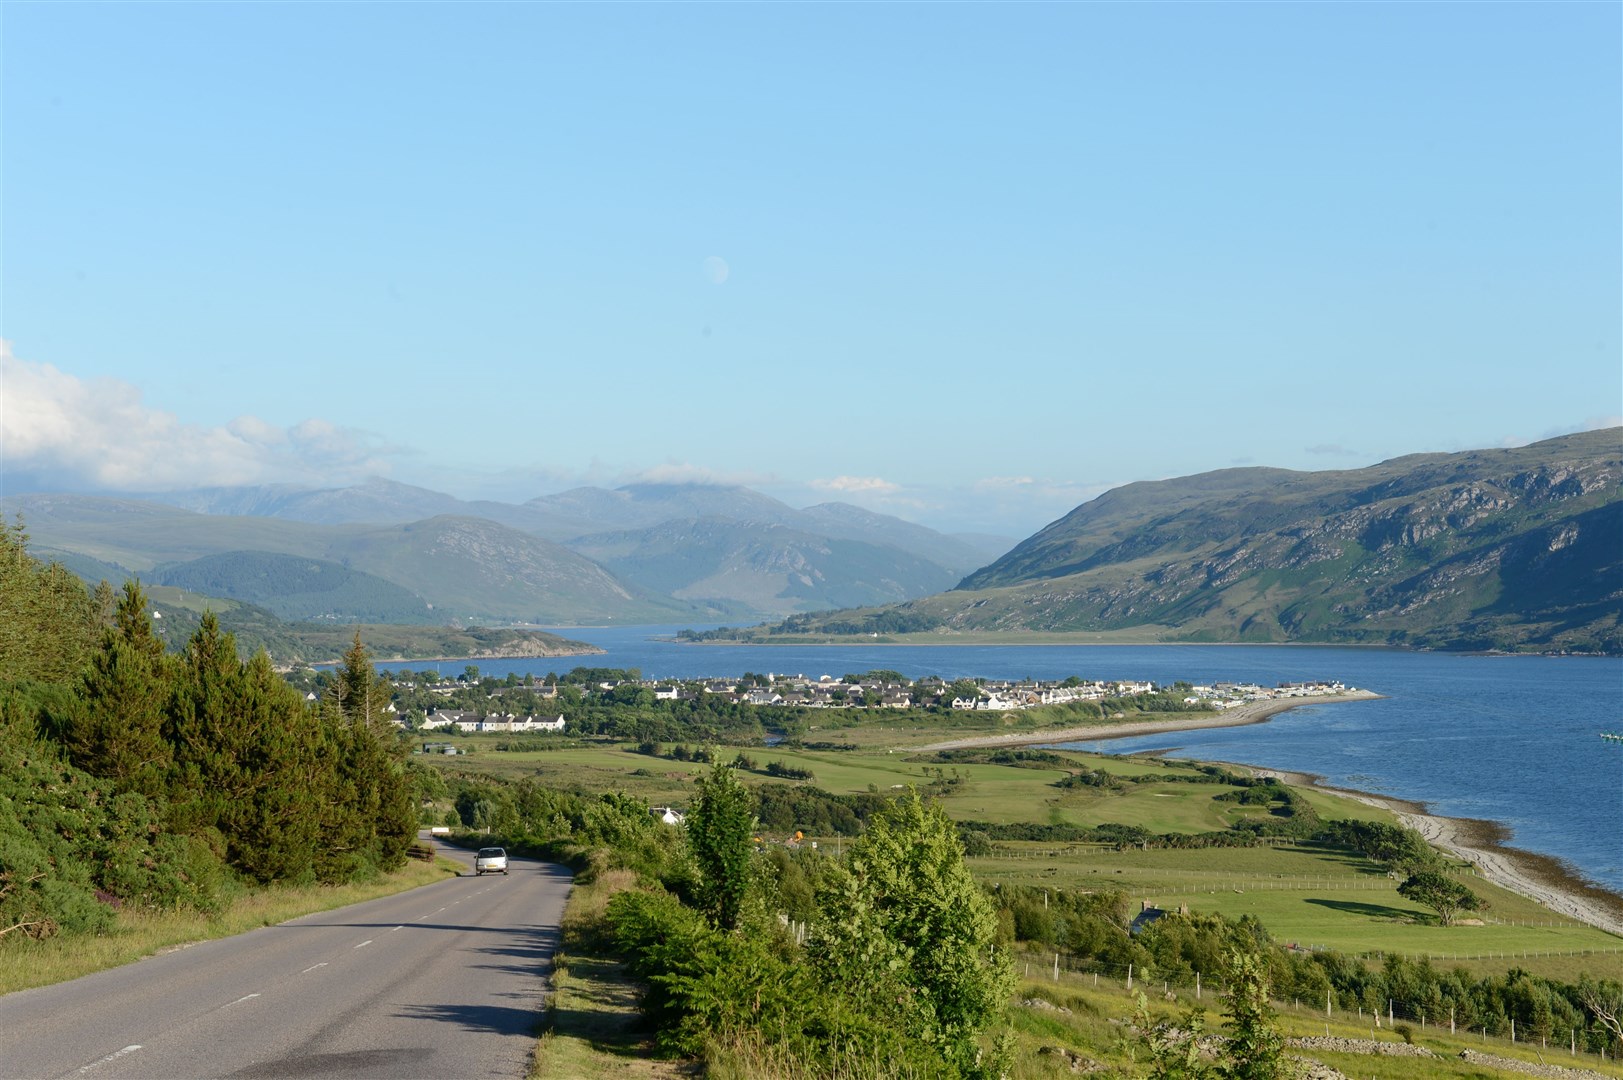 This view down into Ullapool from the North is one that has lifted many a heart. Picture: Alison White